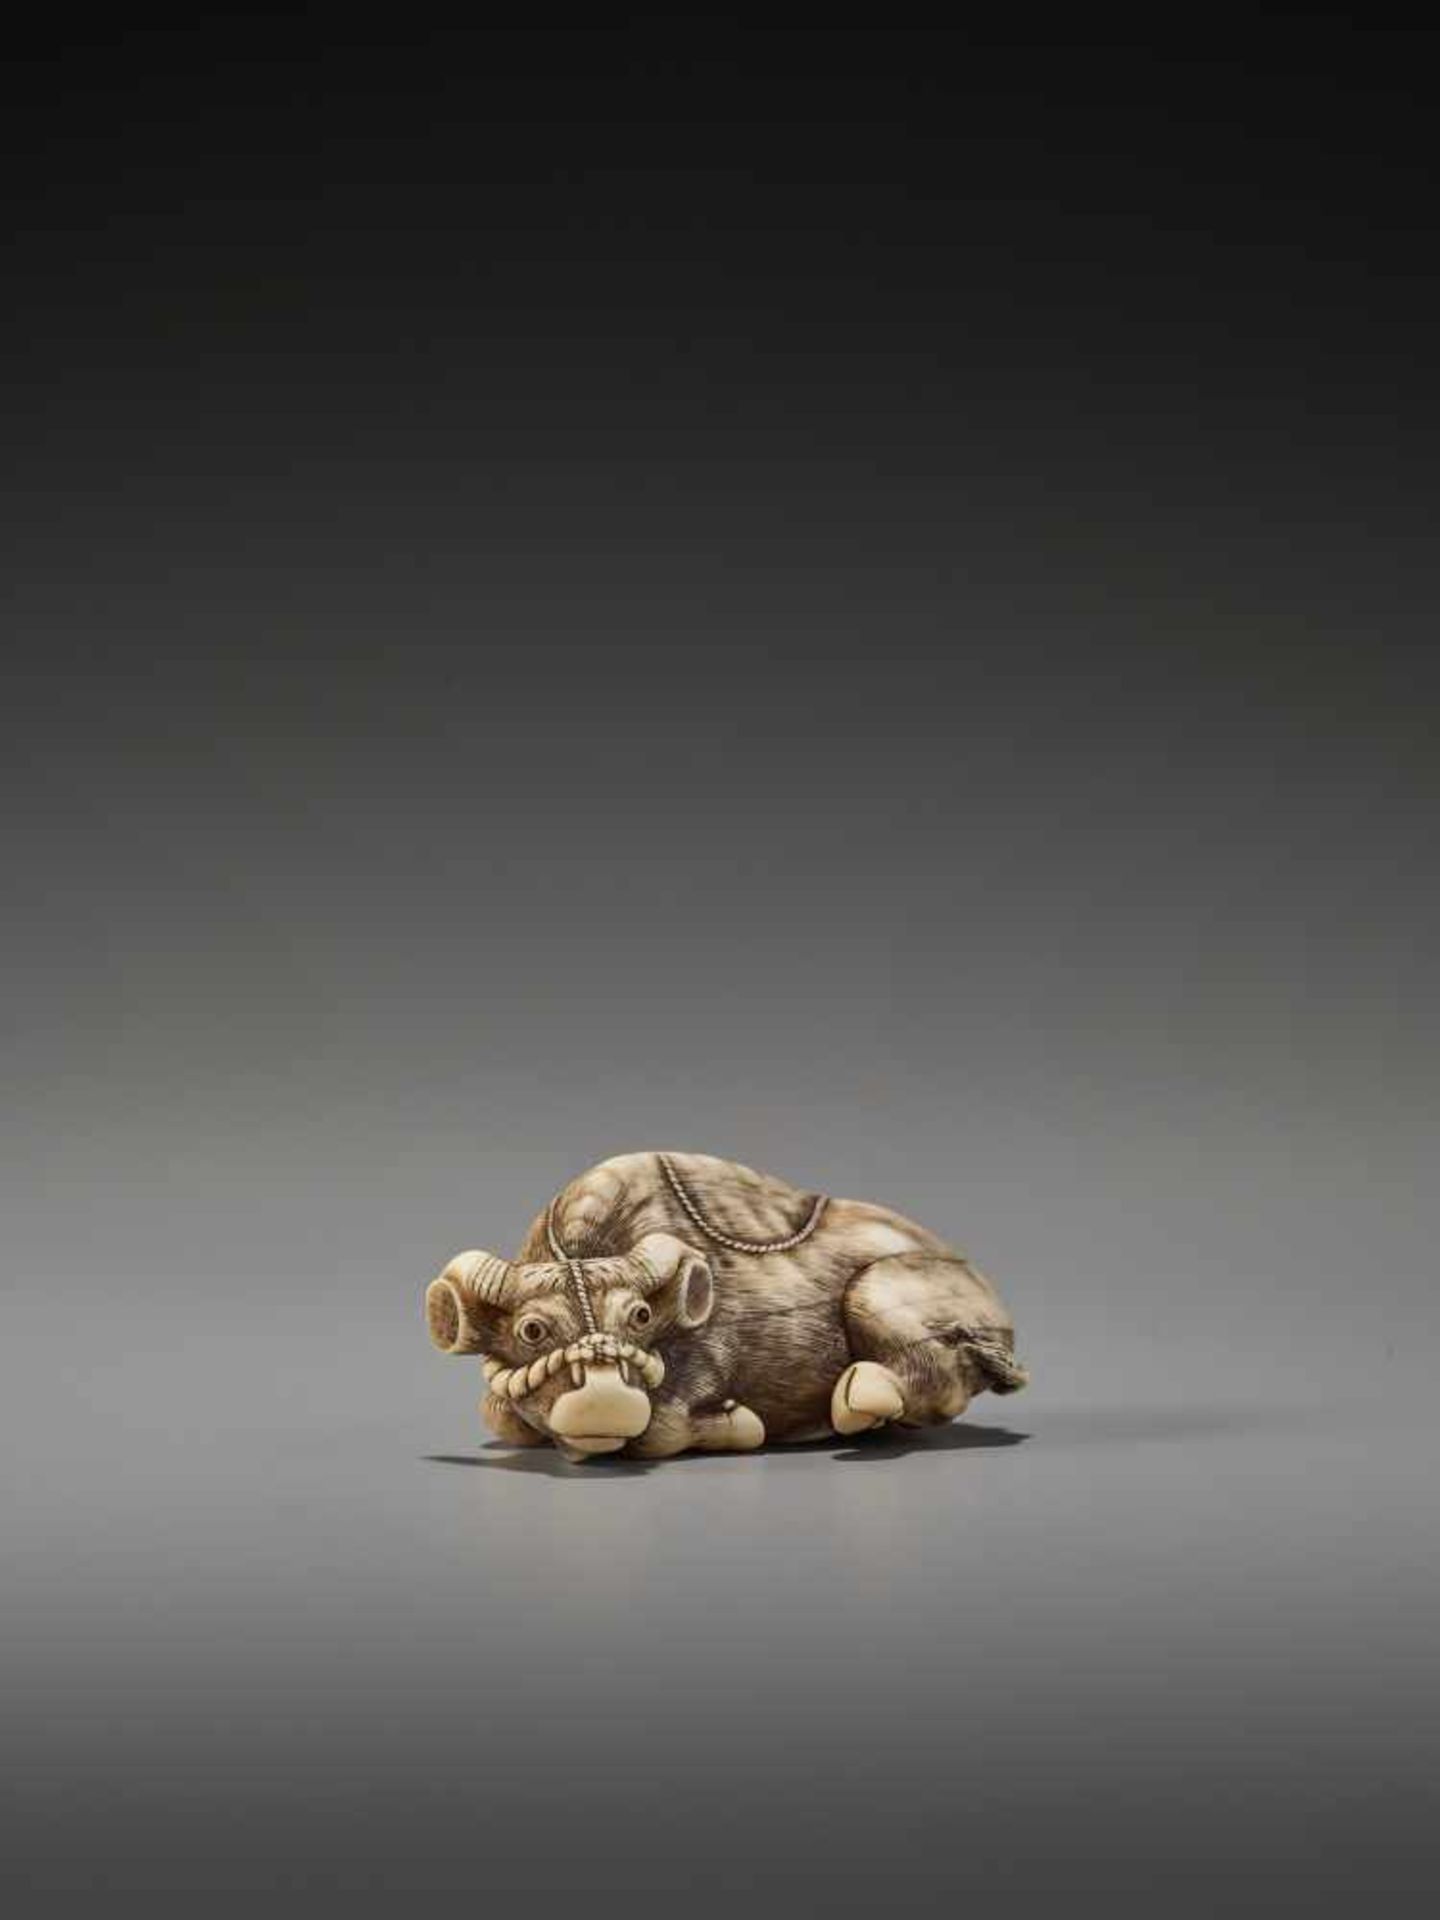 AN EXCELLENT IVORY NETSUKE OF A RECUMBENT OX BY TOMOTADABy Tomotada, ivory netsukeJapan, Kyoto, 18th - Image 6 of 12